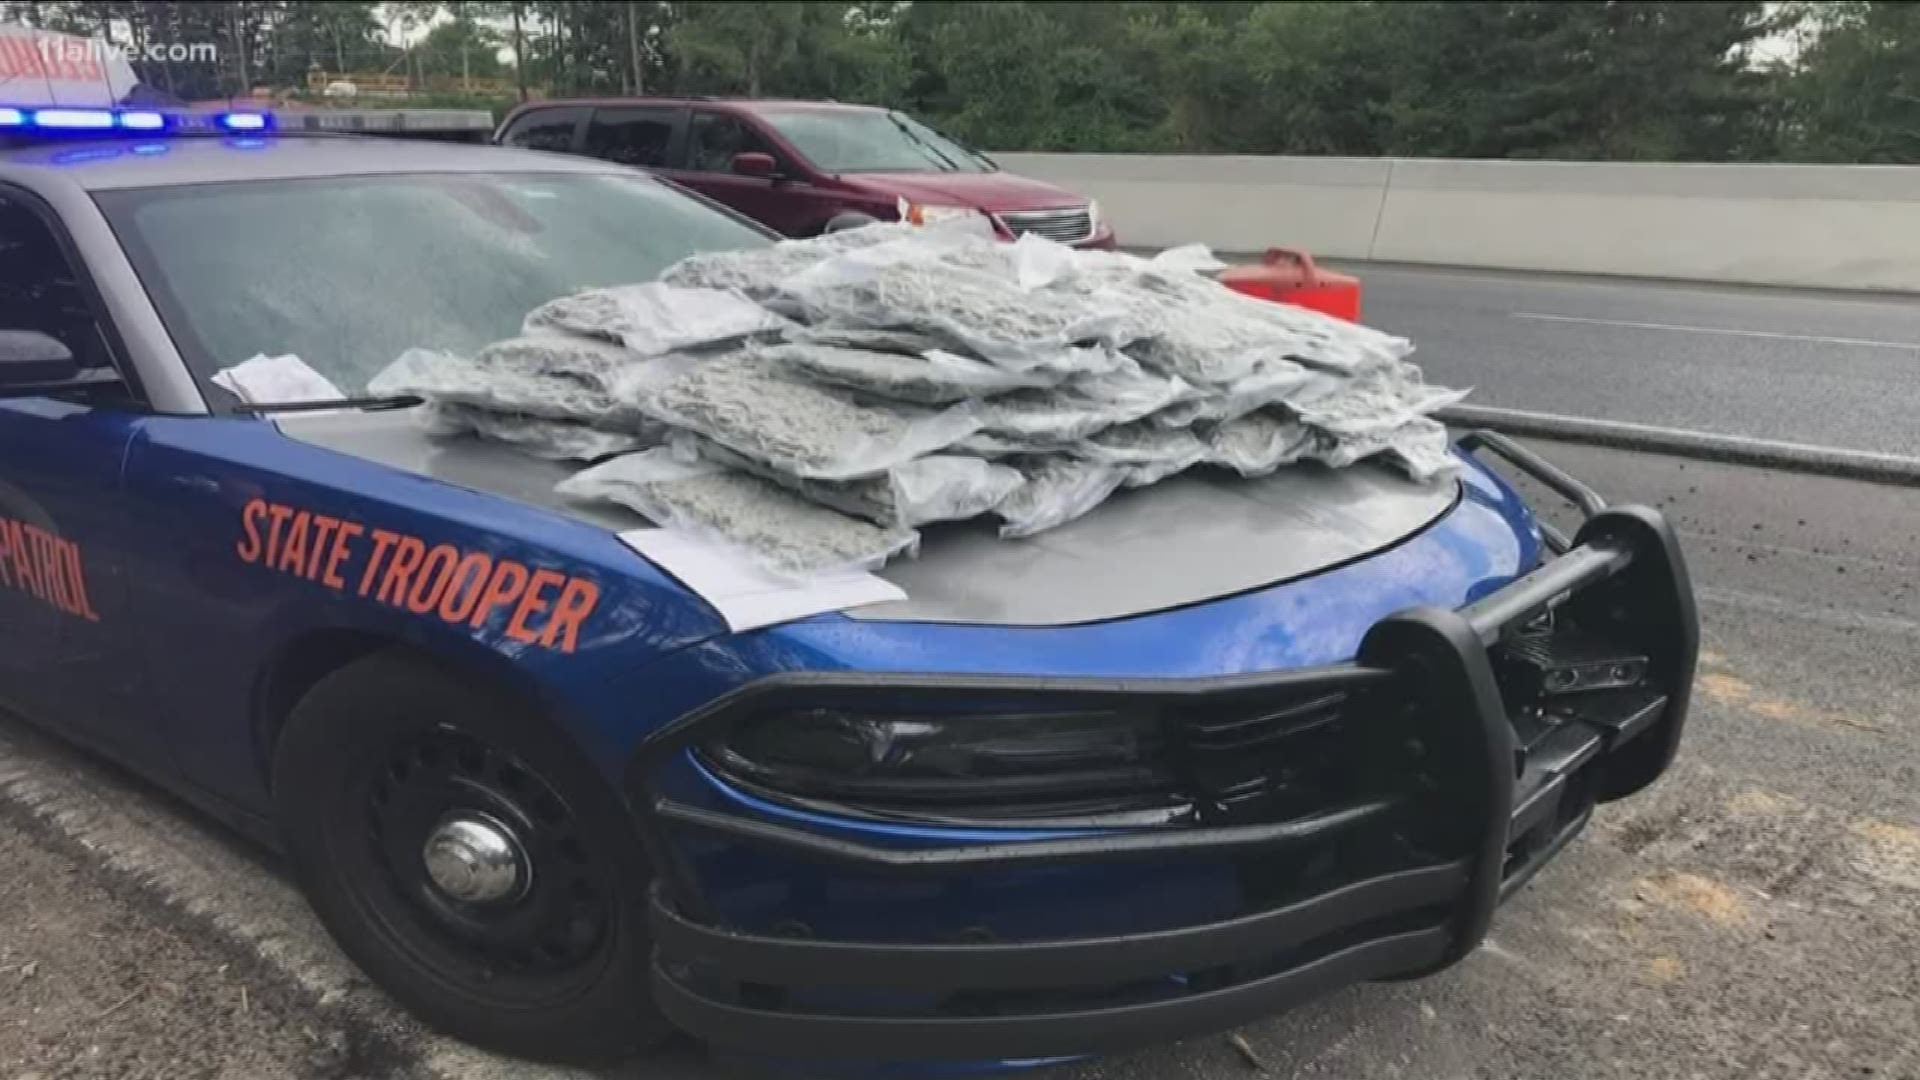 The drugs were found in a traffic stop.